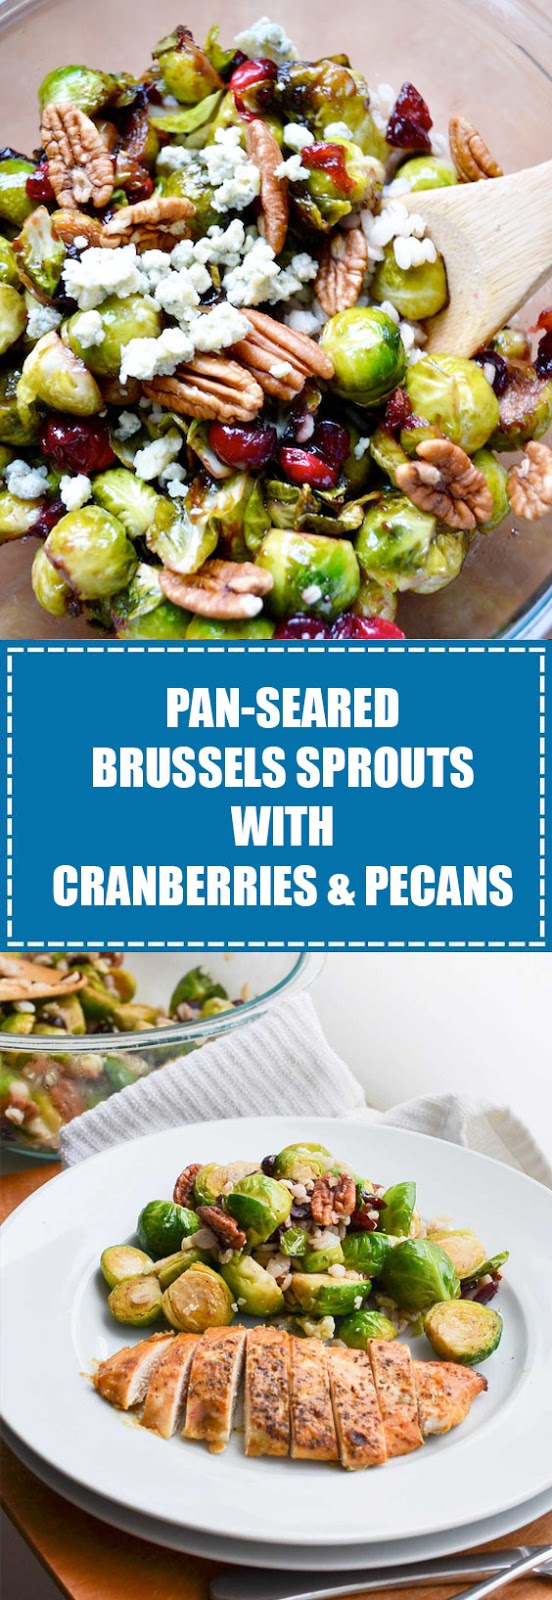 Pan-seared Brussels Sprouts with Cranberries & Pecans